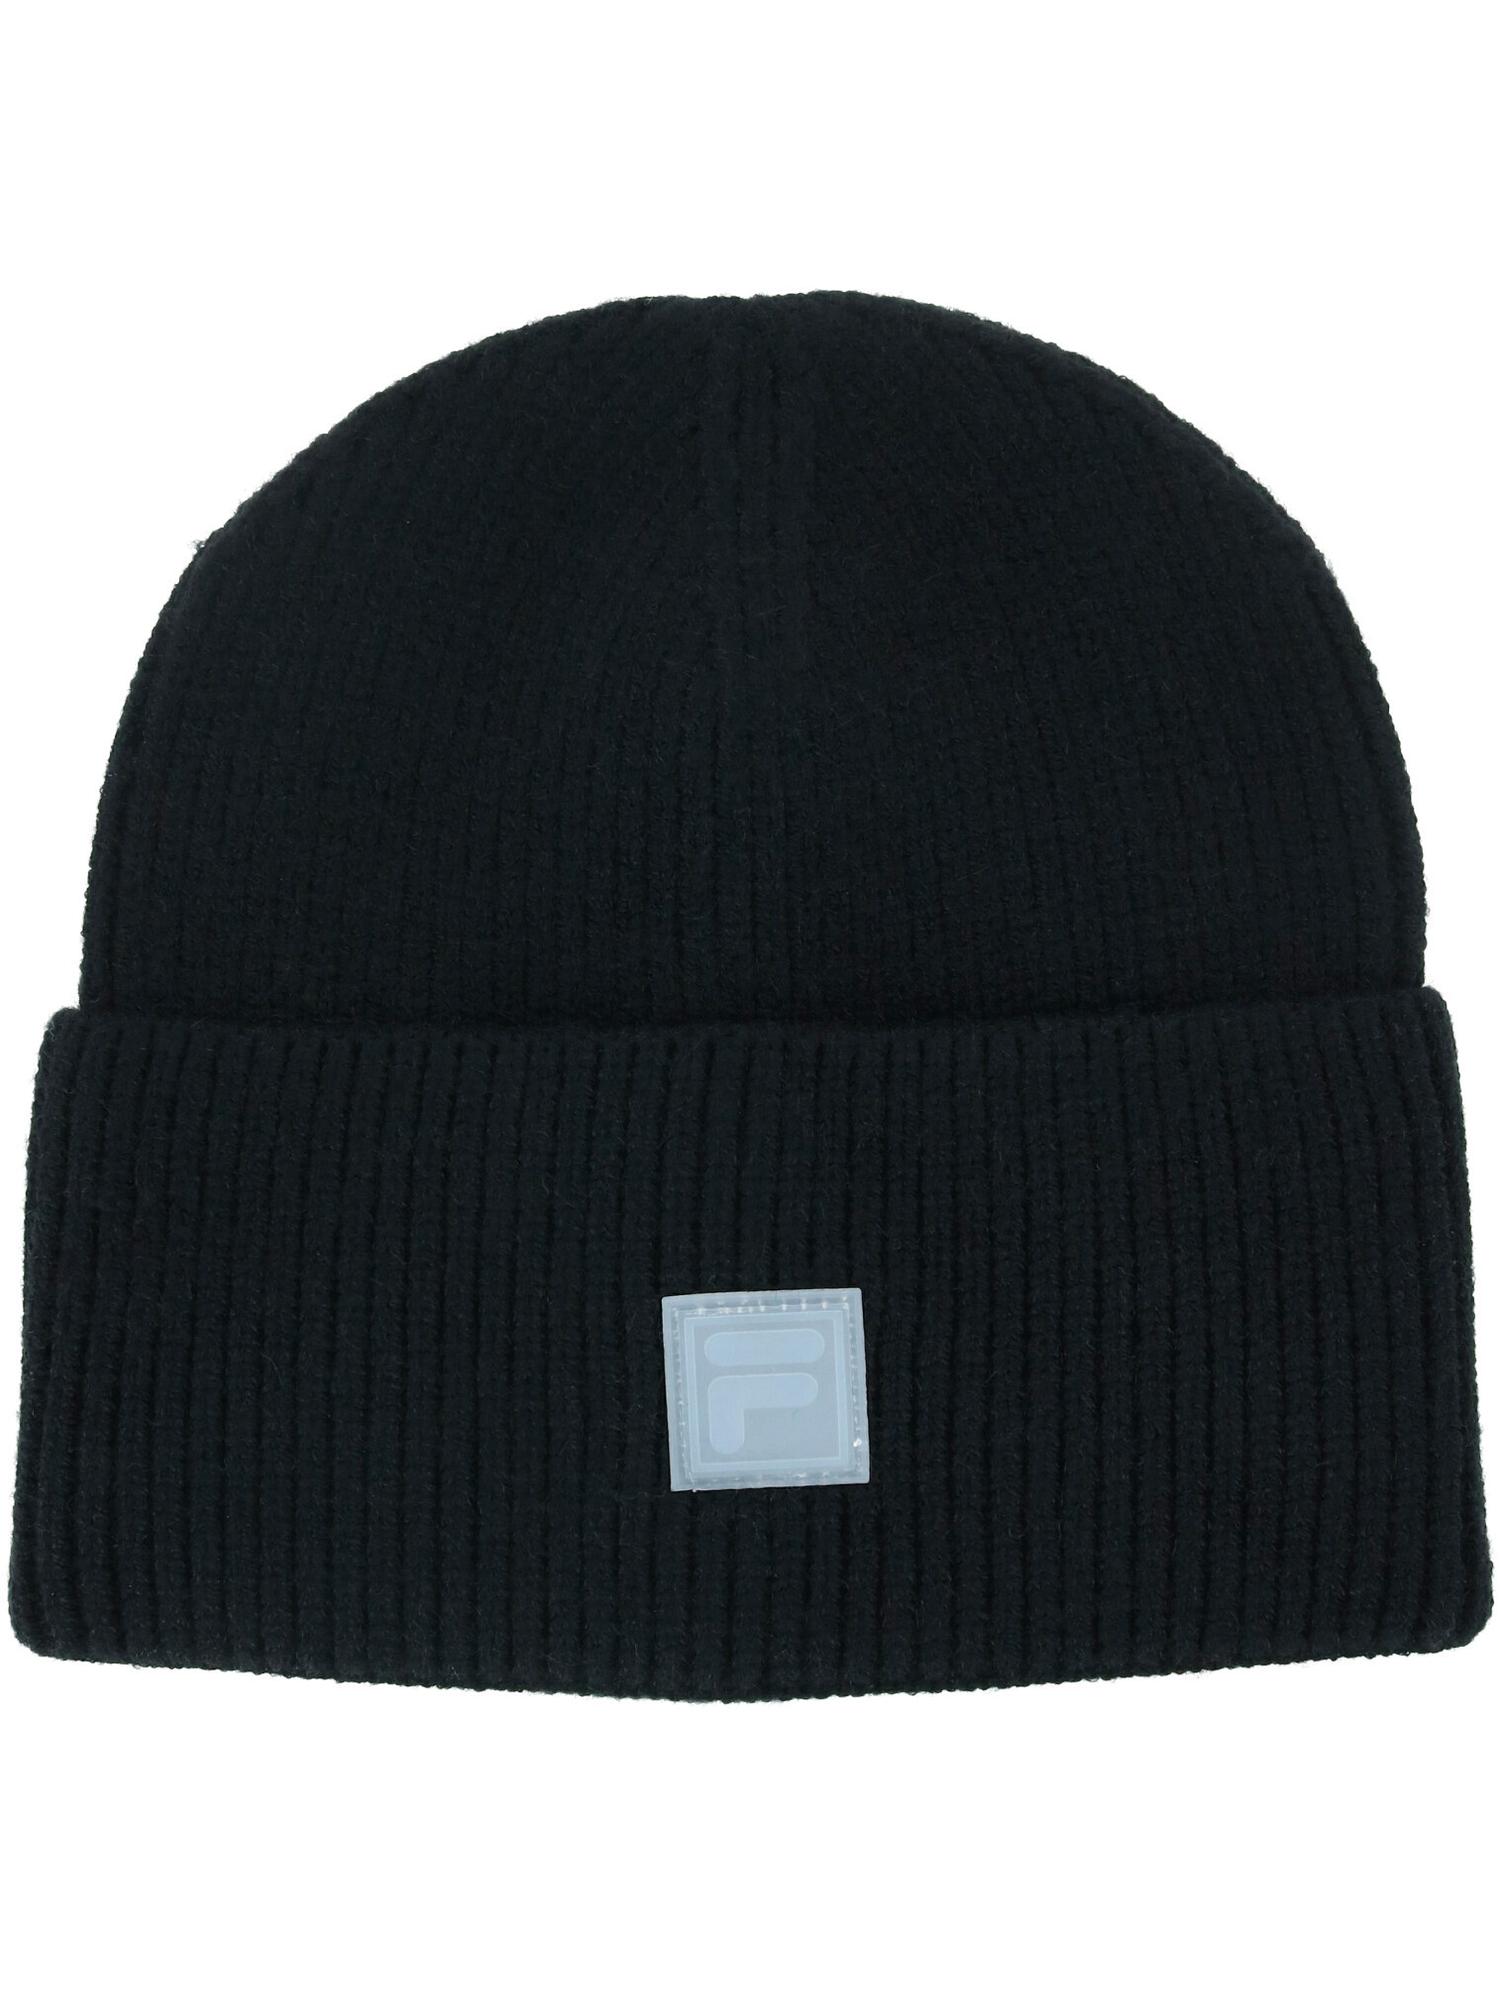 Fila Solid Ribbed Beanie Cuff Hat - image 1 of 1